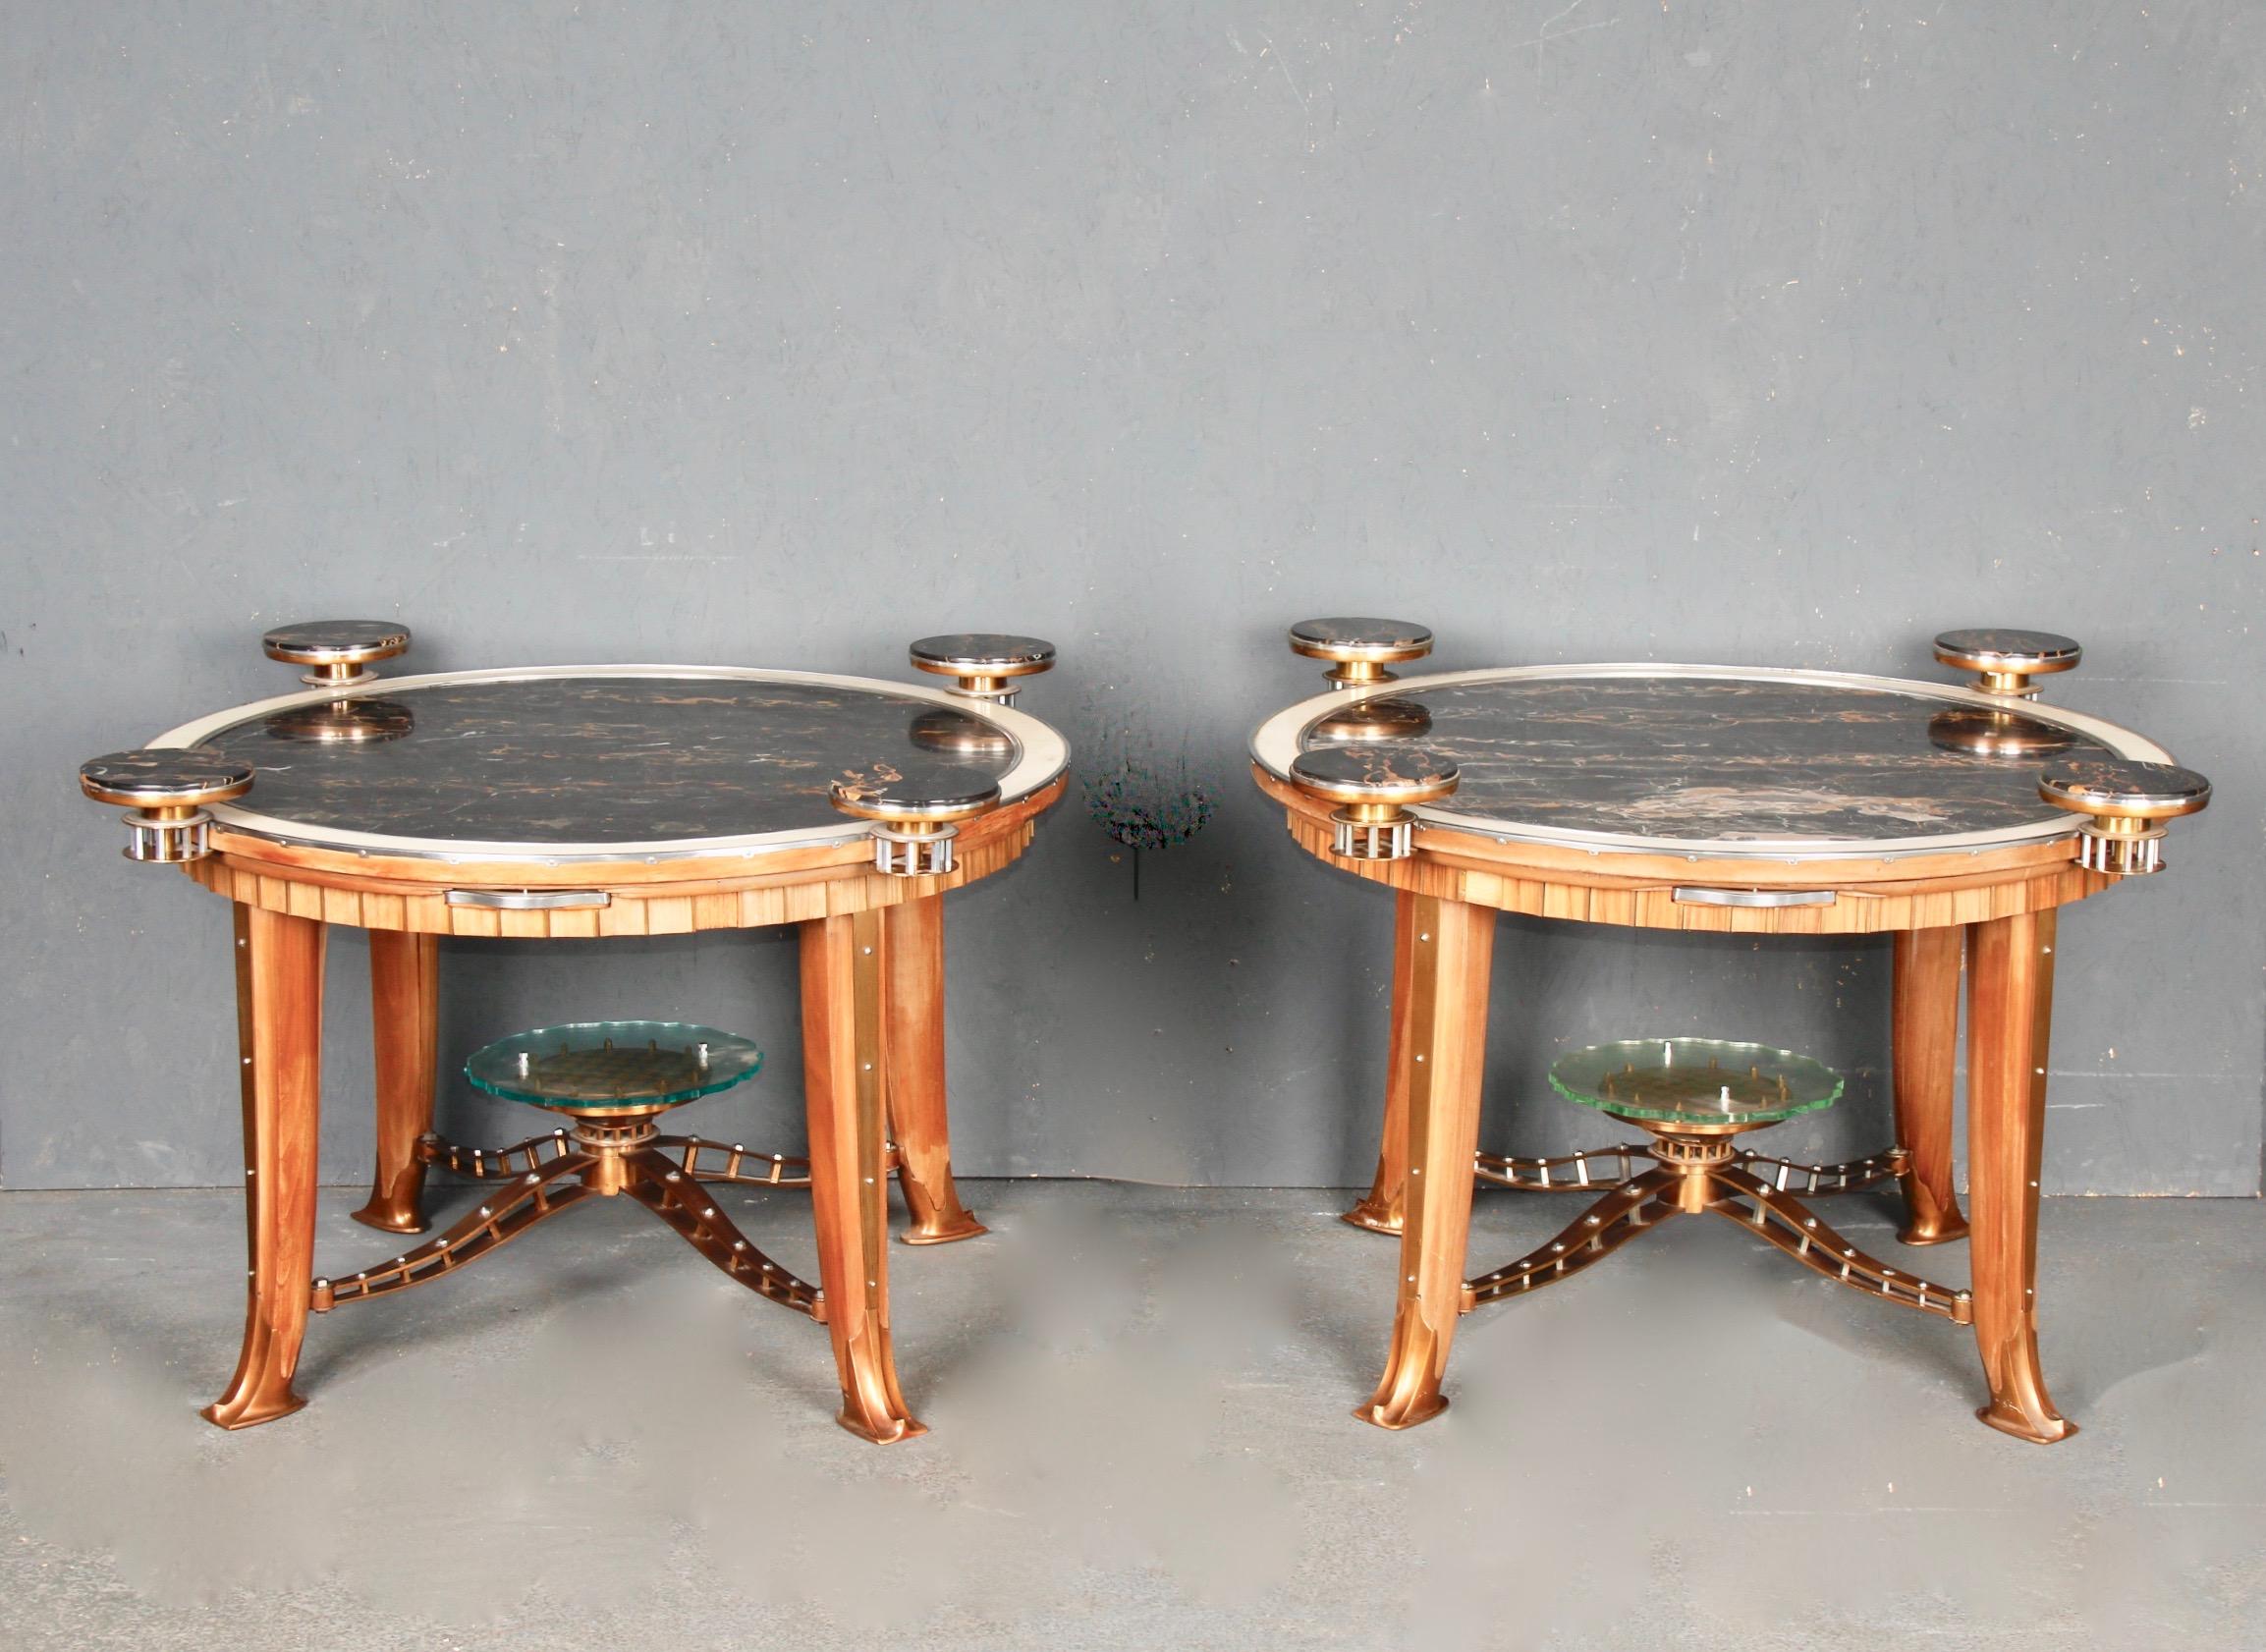 Pair of Art Deco side table, each table has 4 small shelves that can be opened or closed the materials chosen are very rich marble, glass, wood and very sophisticated metal work.